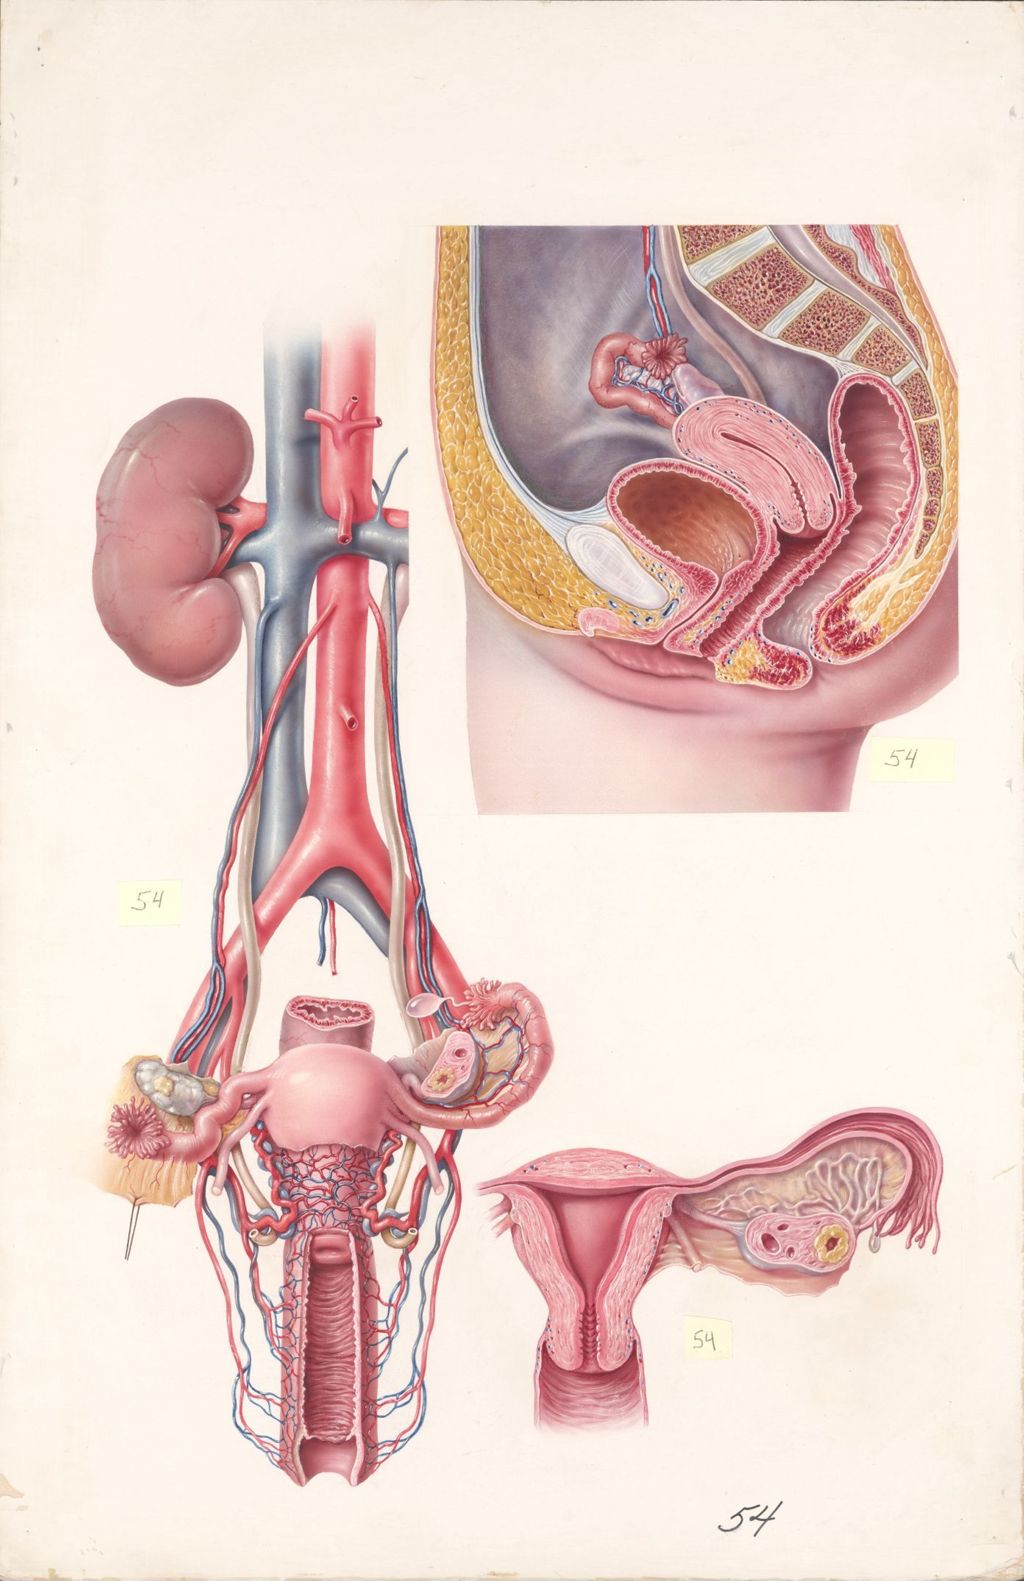 Medical Profiles, Diuril and Hydrodiuril, Normal Female Reproductive Organs